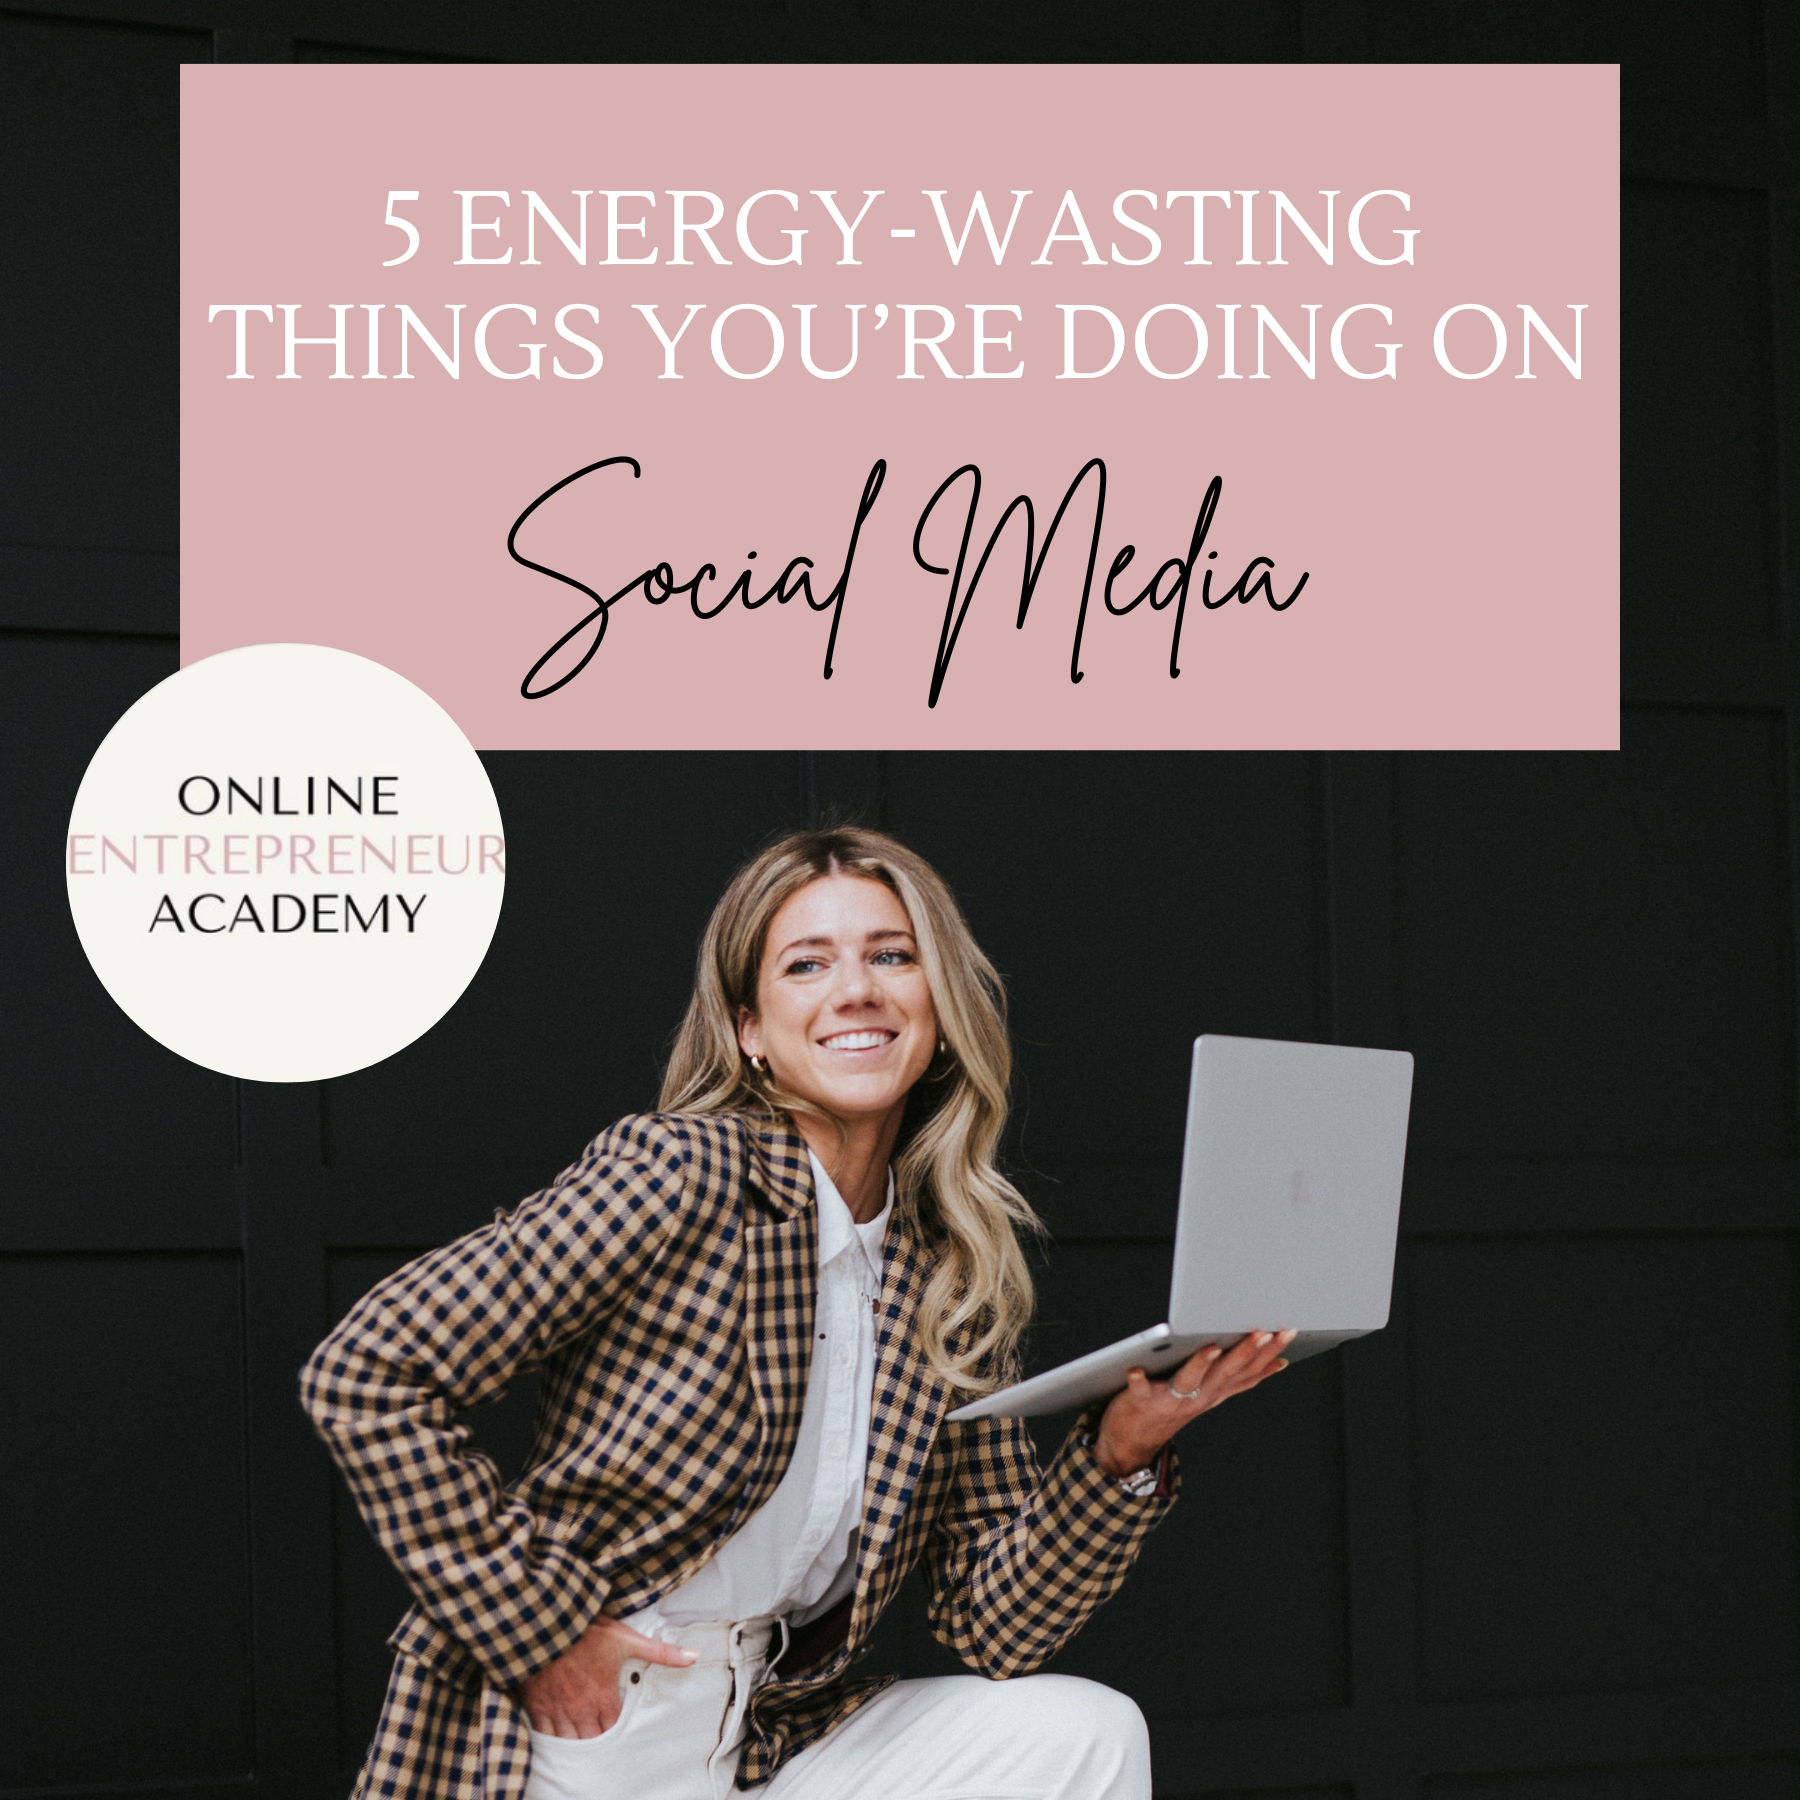 5 Energy-Wasting Things You’re Doing on Social Media